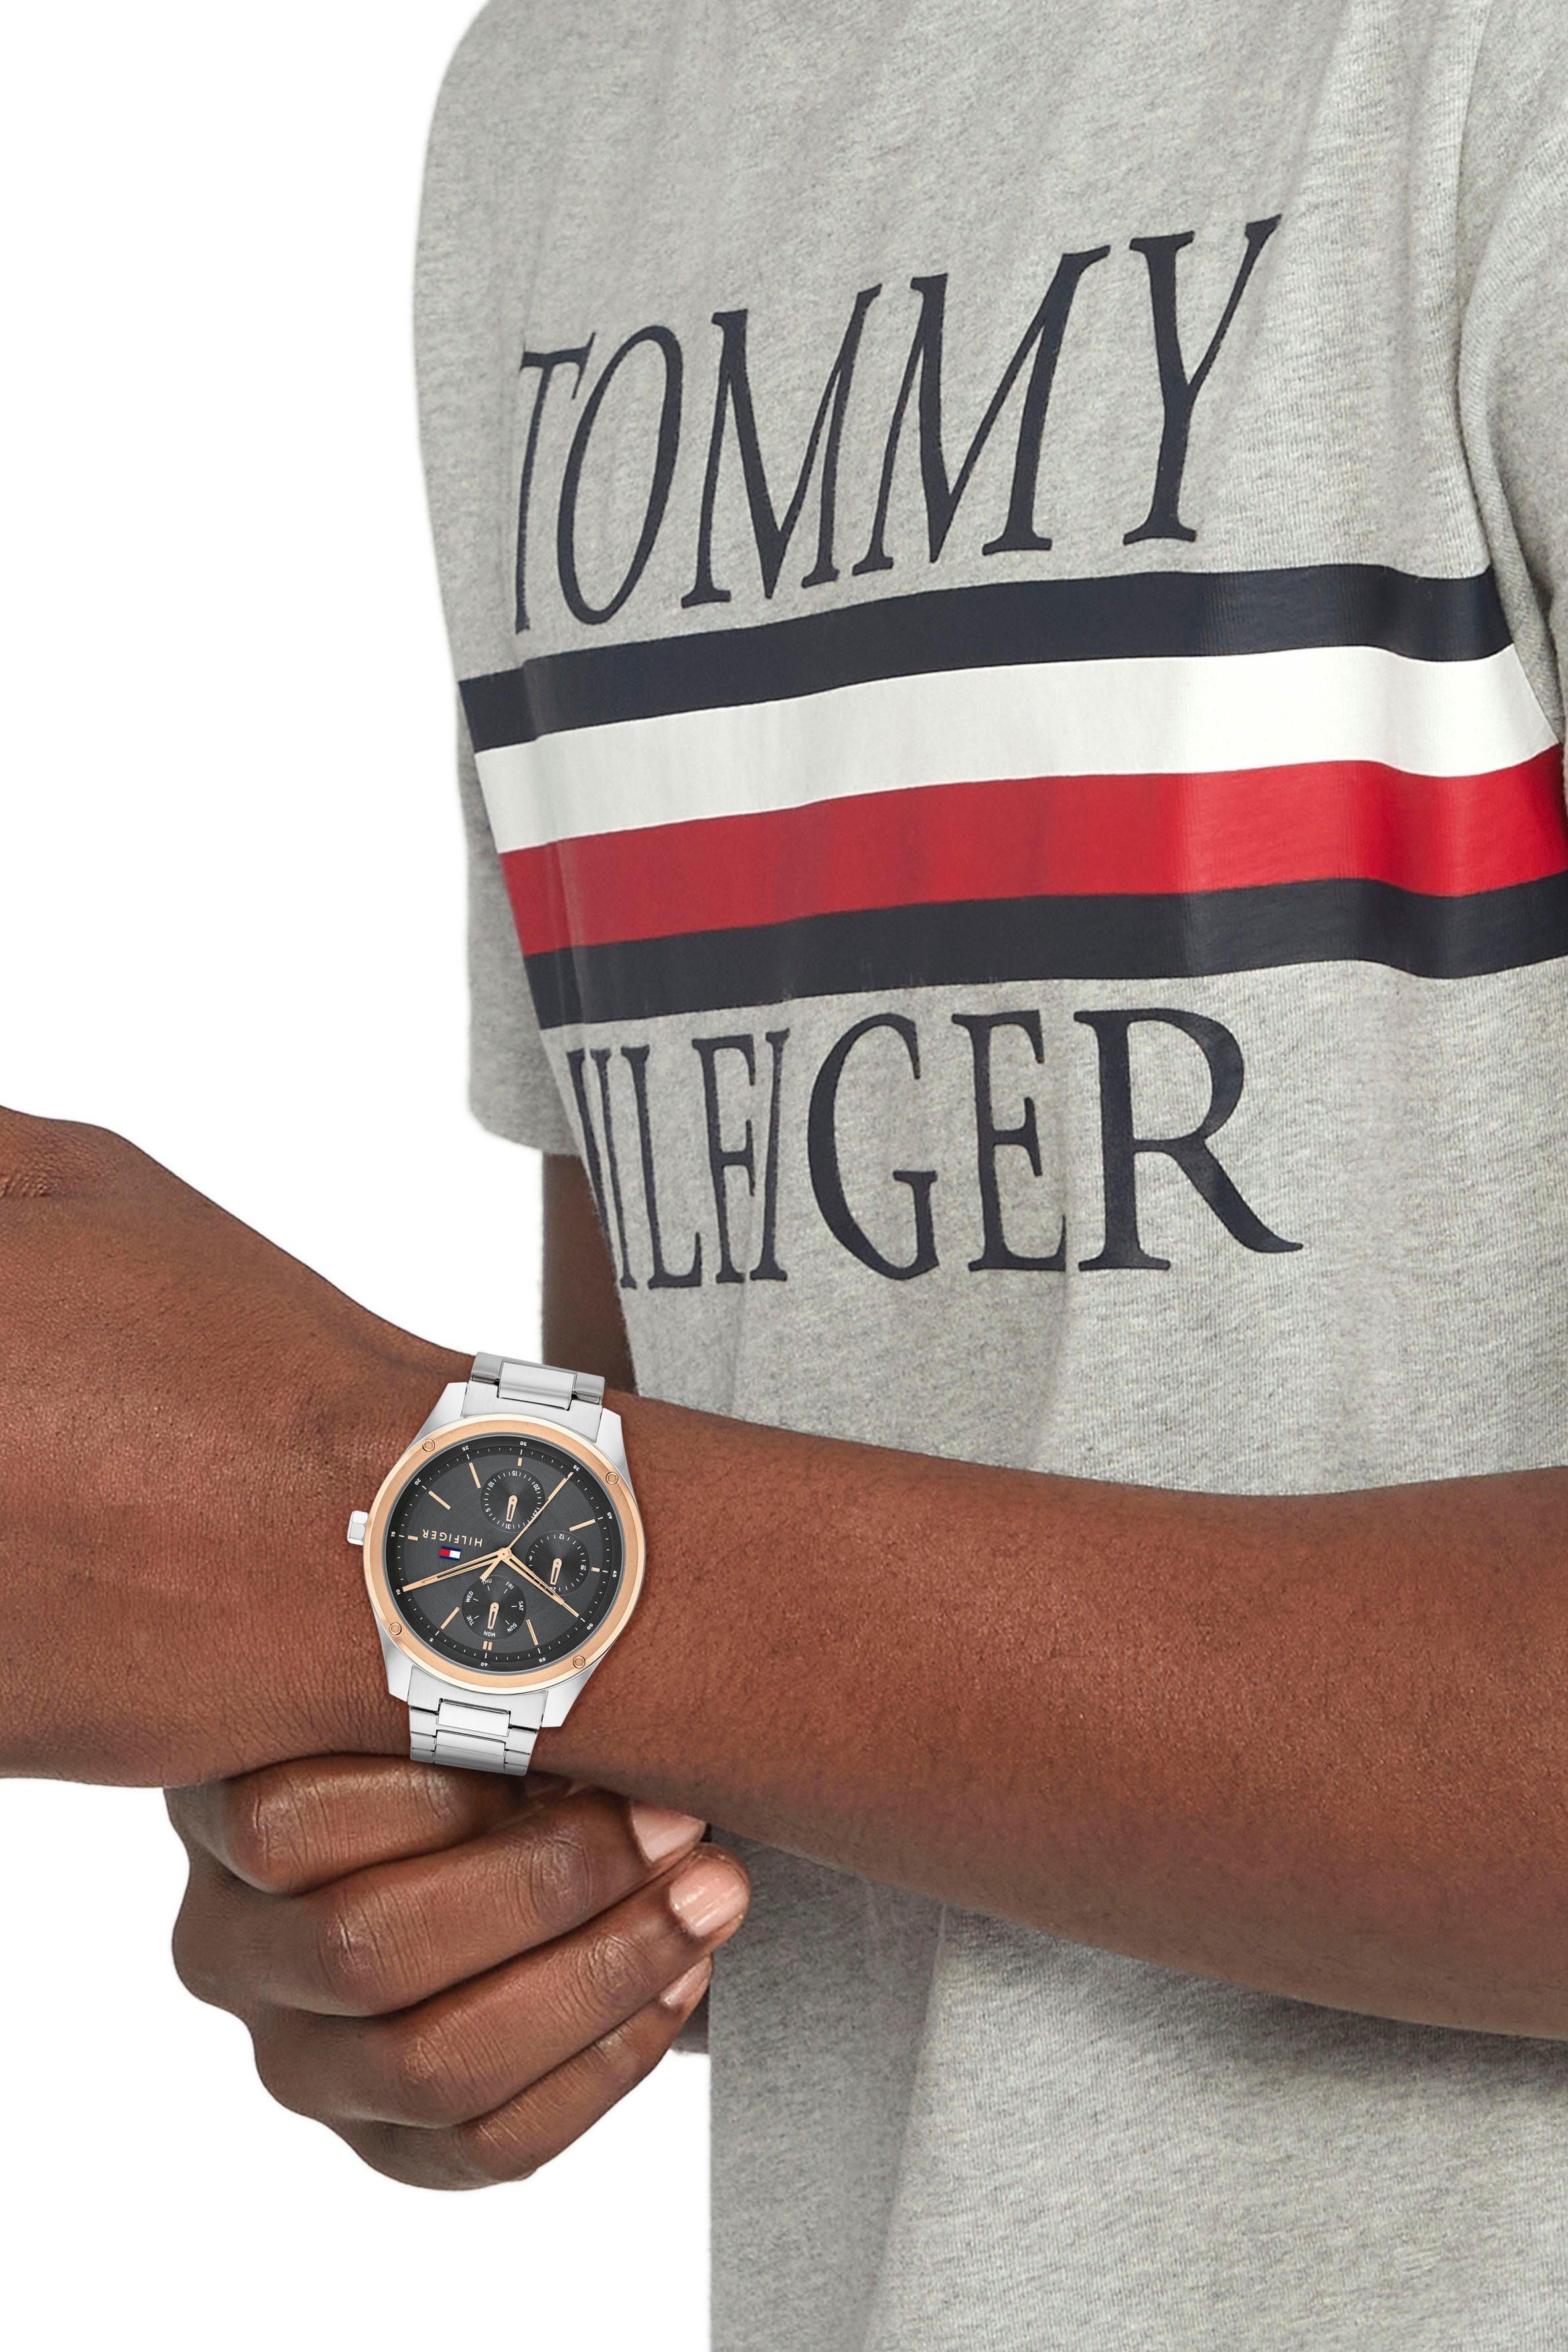 Hilfiger Multifunktionsuhr Tommy CASUAL, 1710541